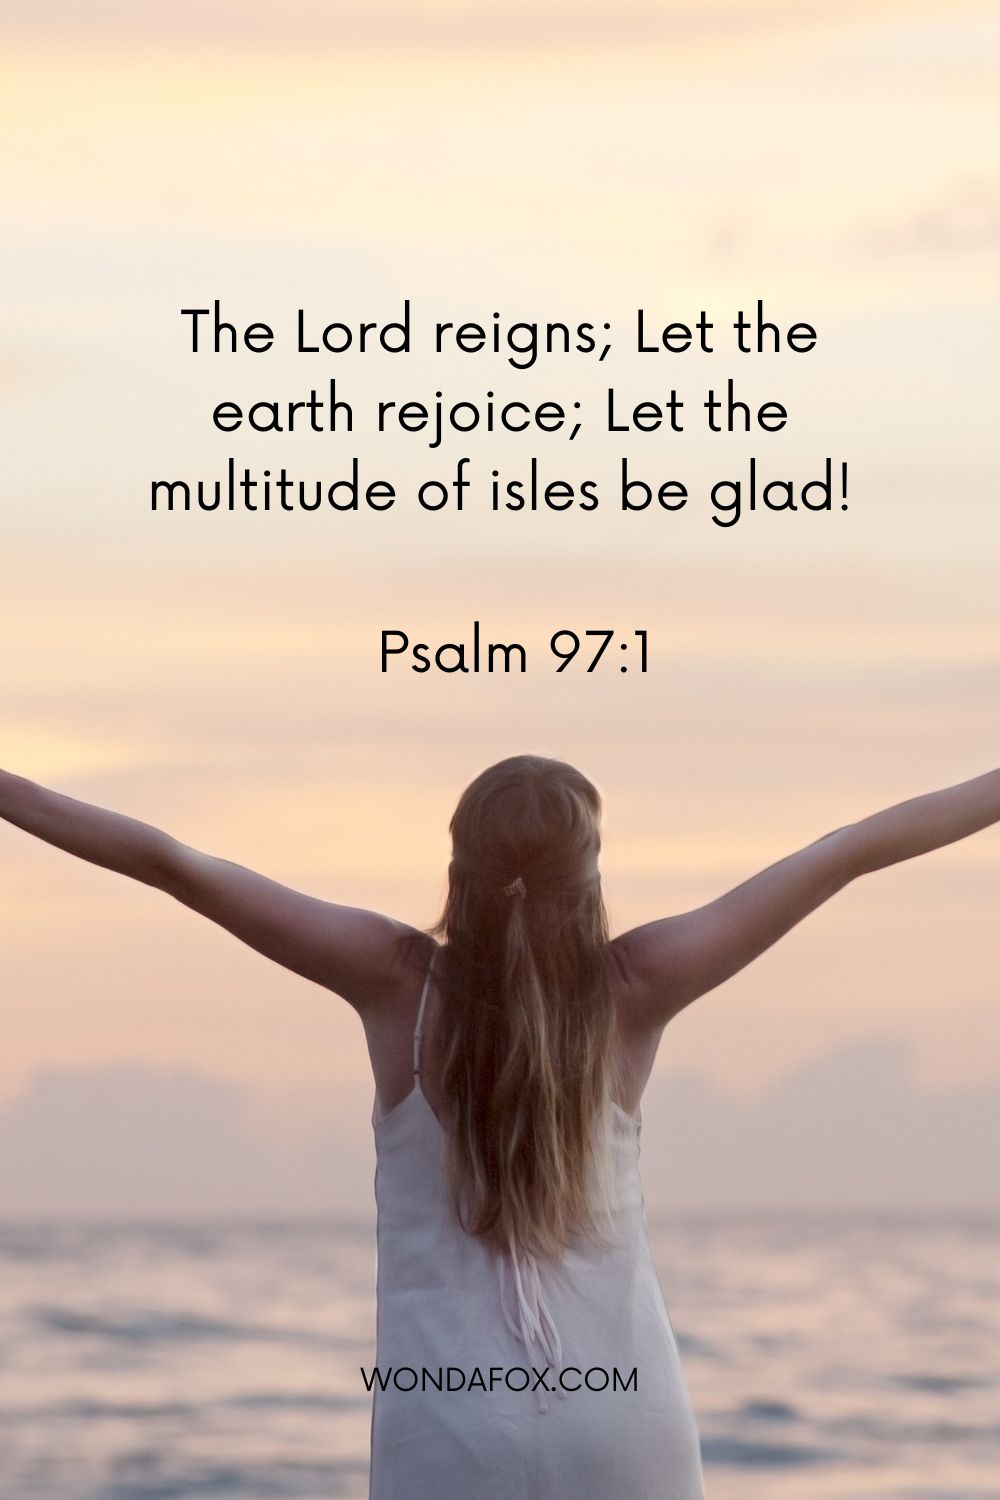 The Lord reigns; Let the earth rejoice; Let the multitude of isles be glad!